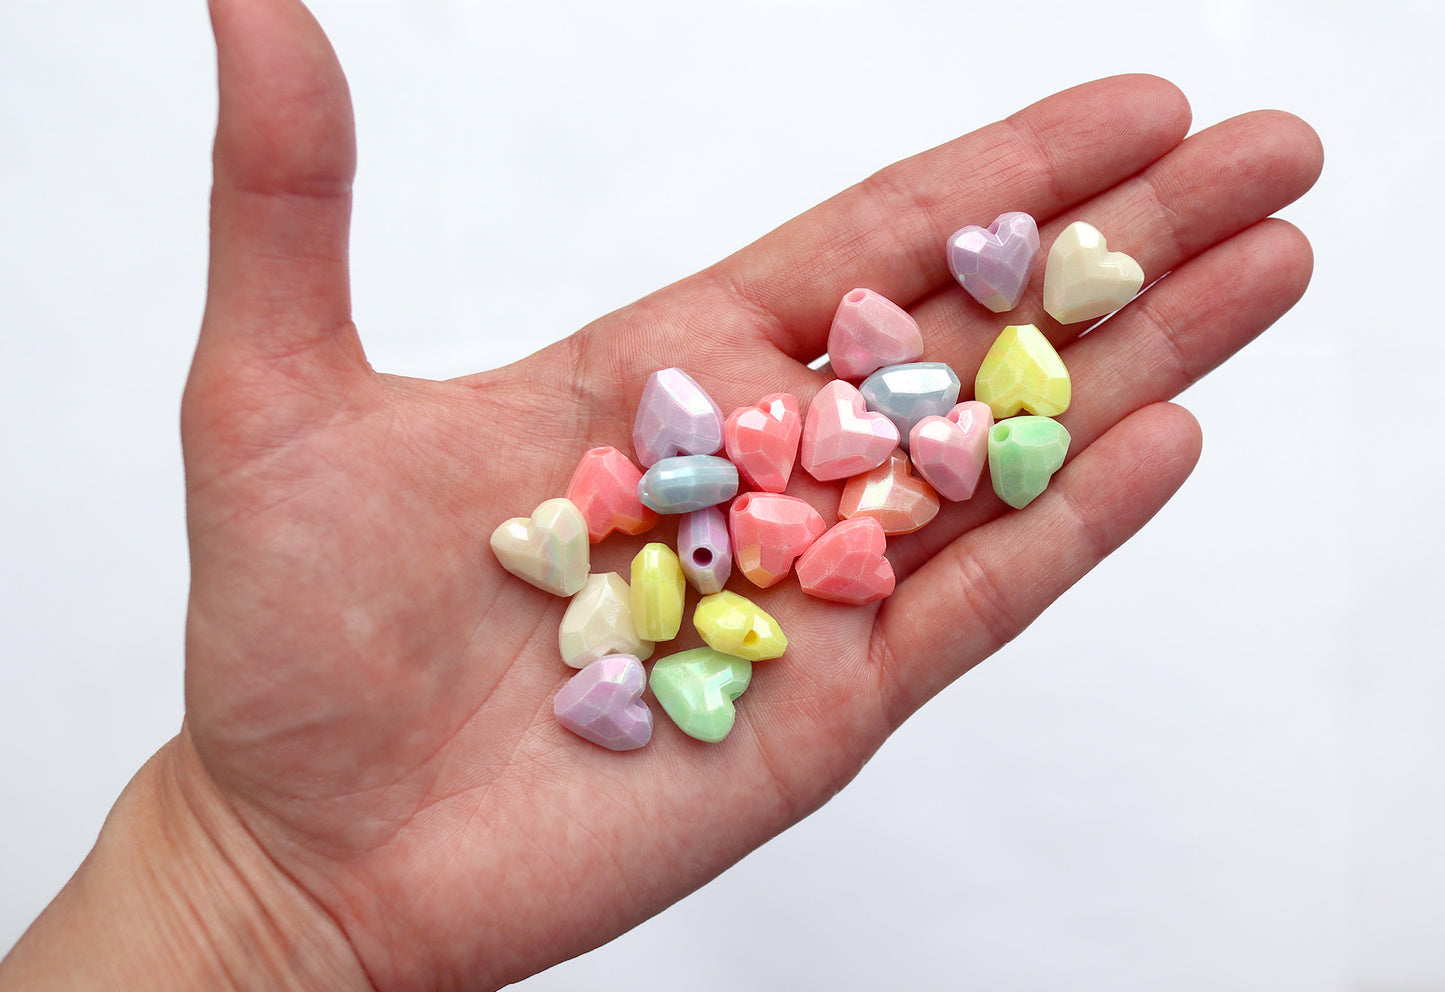 Pastel Heart Beads - 13mm Faceted Pastel Heart Beautiful Bright Hearts Acrylic or Resin Beads - 100 pcs set